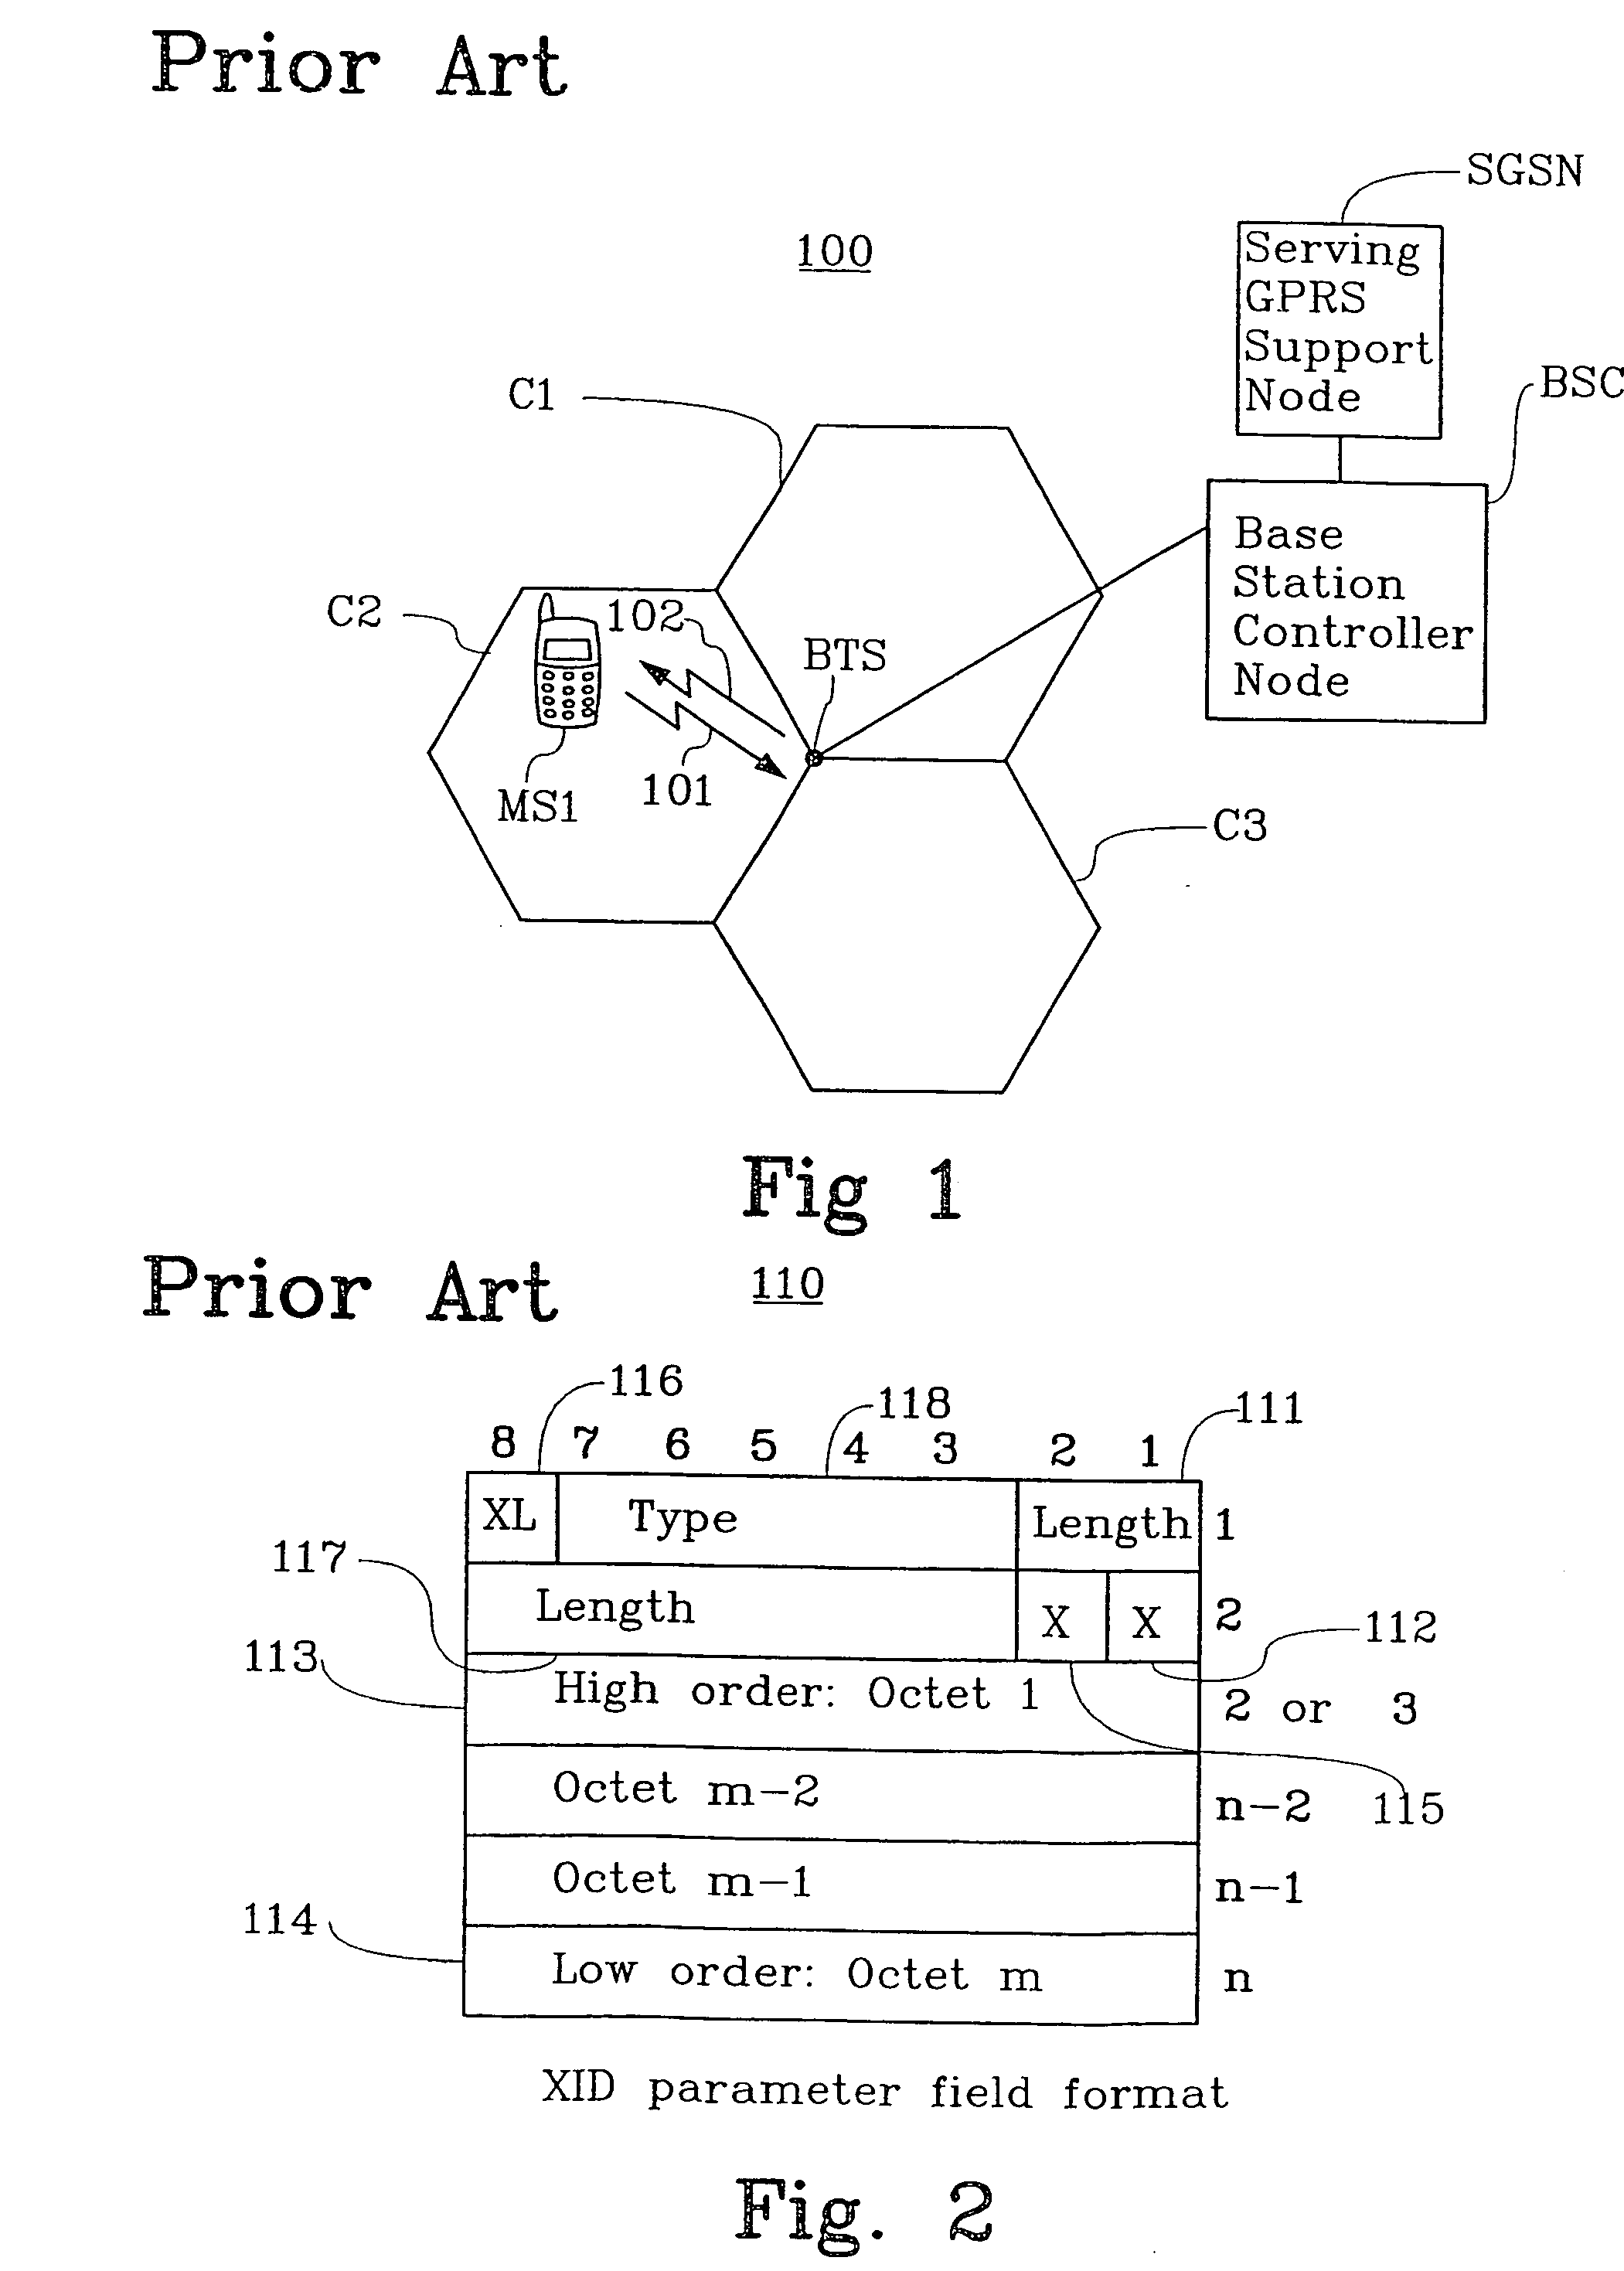 Method of improving the performance between one mobile station and a base station by selective setting of the retransmission time-out values